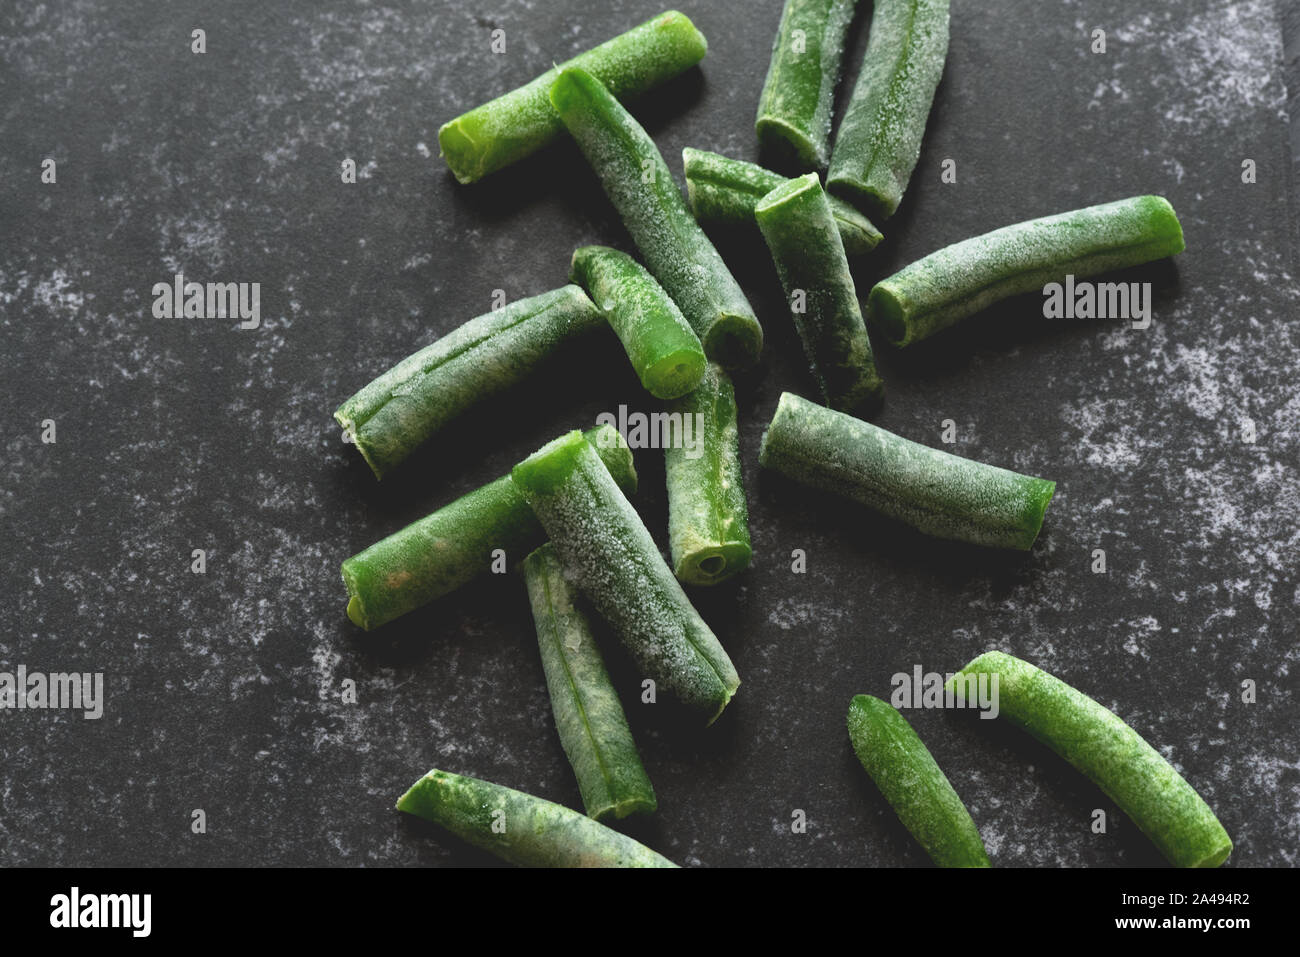 Green beans on a stone cutting board background. Stock Photo